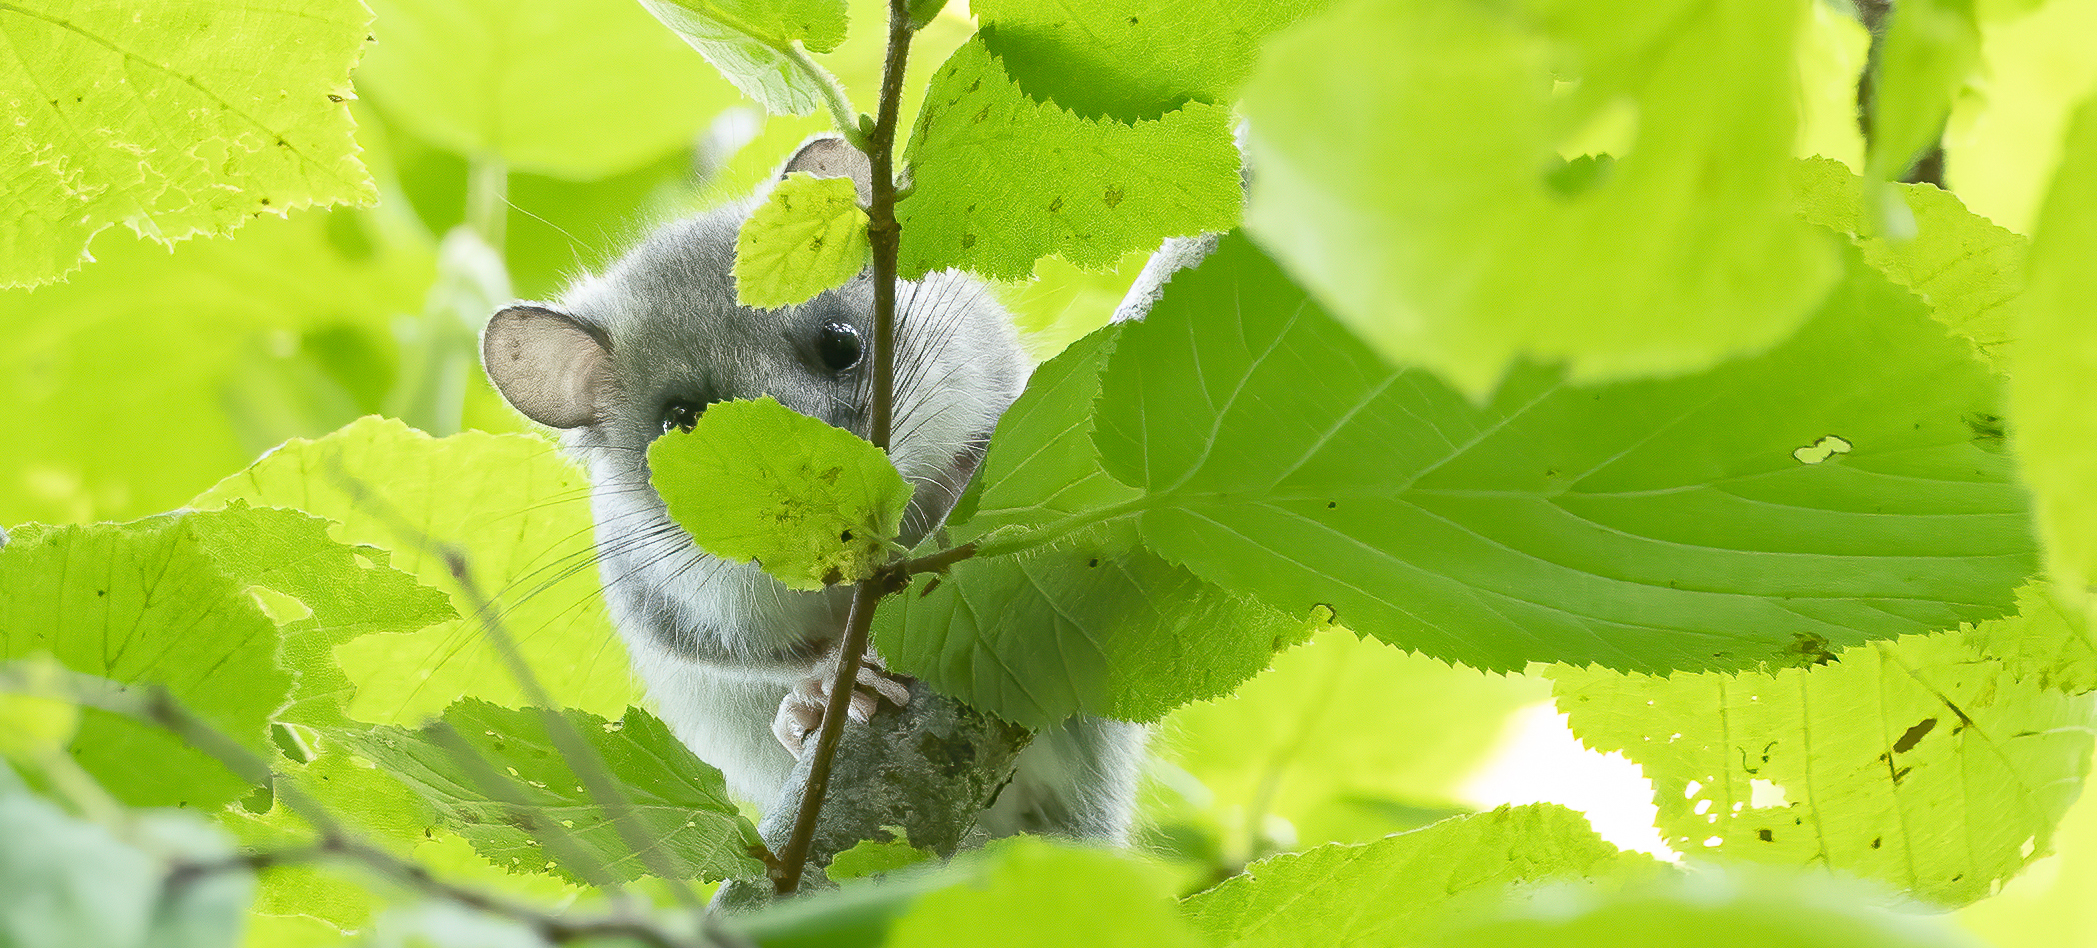 Fat dormouse hiding behind leaves